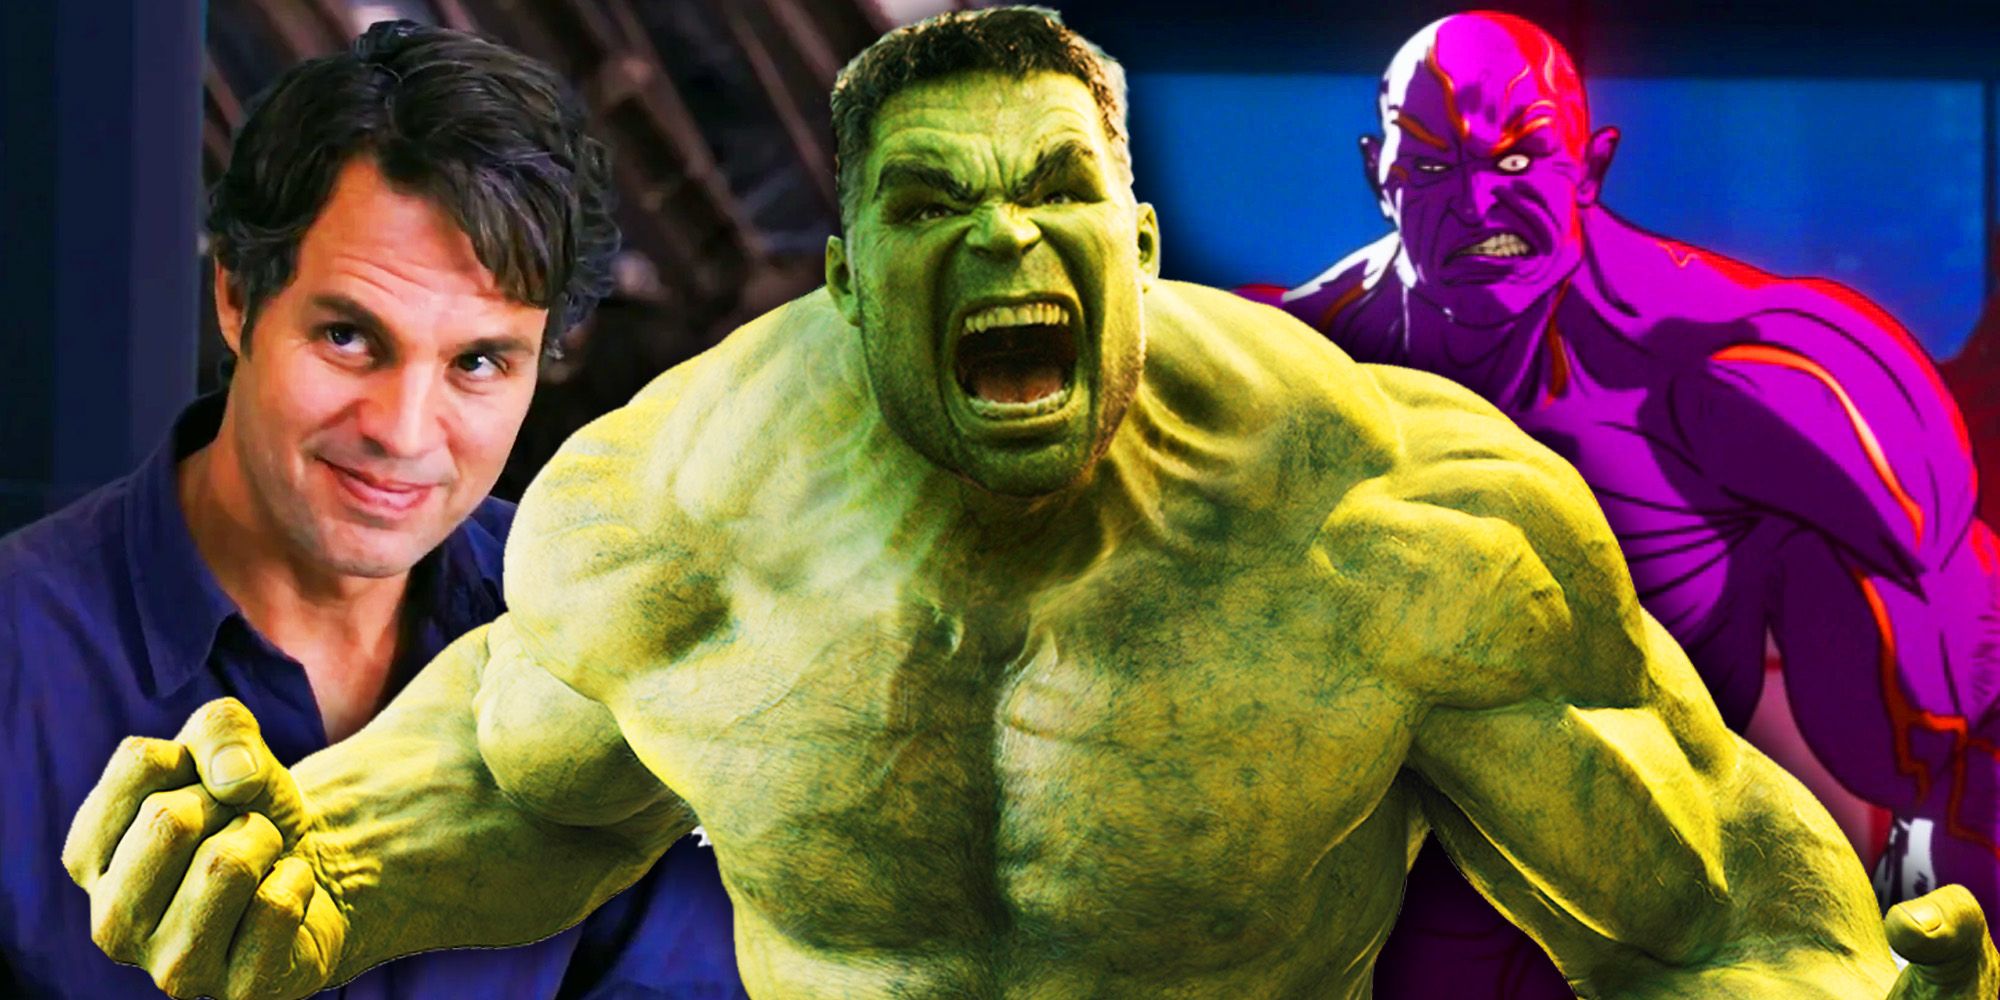 Mark Ruffalo as Bruce Banner and Hulk next to What If's Happy Hogan as Freak